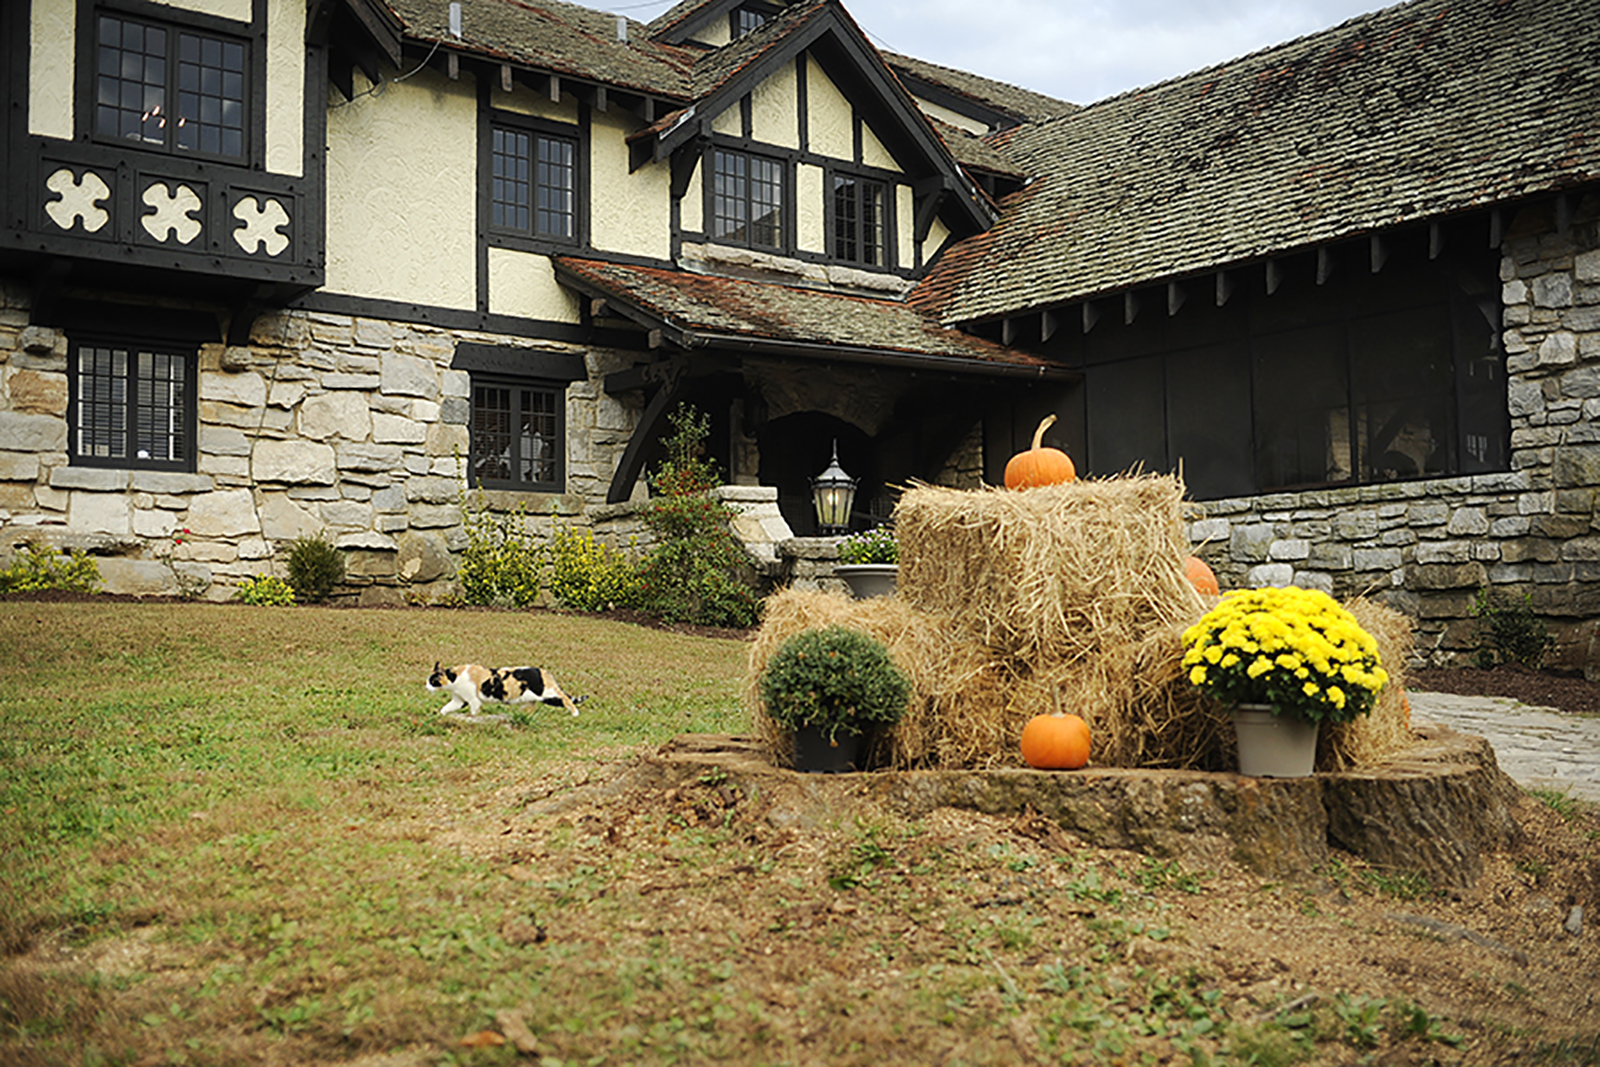 Milky Way manor house with hay bales and pumpkins in the foreground and a calico cat walking across the ground to the left.